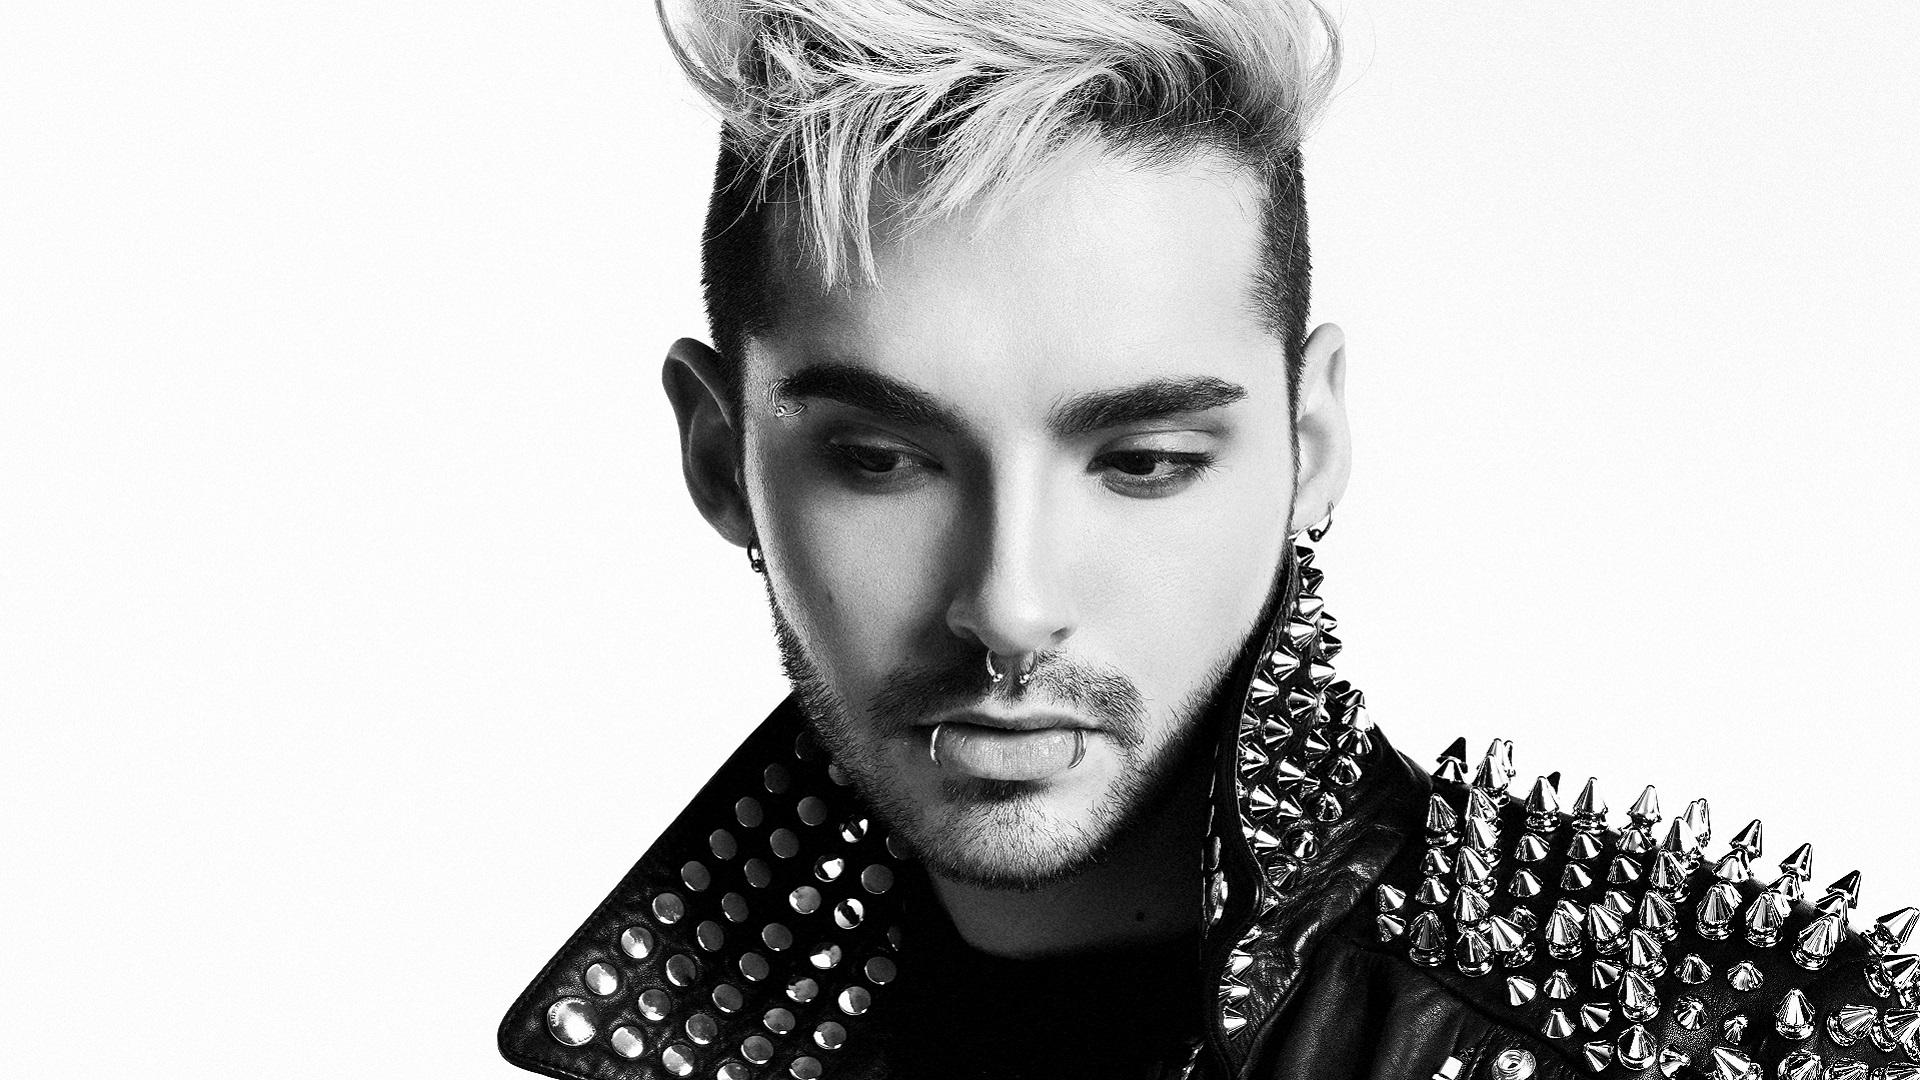 EXCLUSIVE: Tokio Hotel's Bill Kaulitz in his own words on heartbreak and looking for love